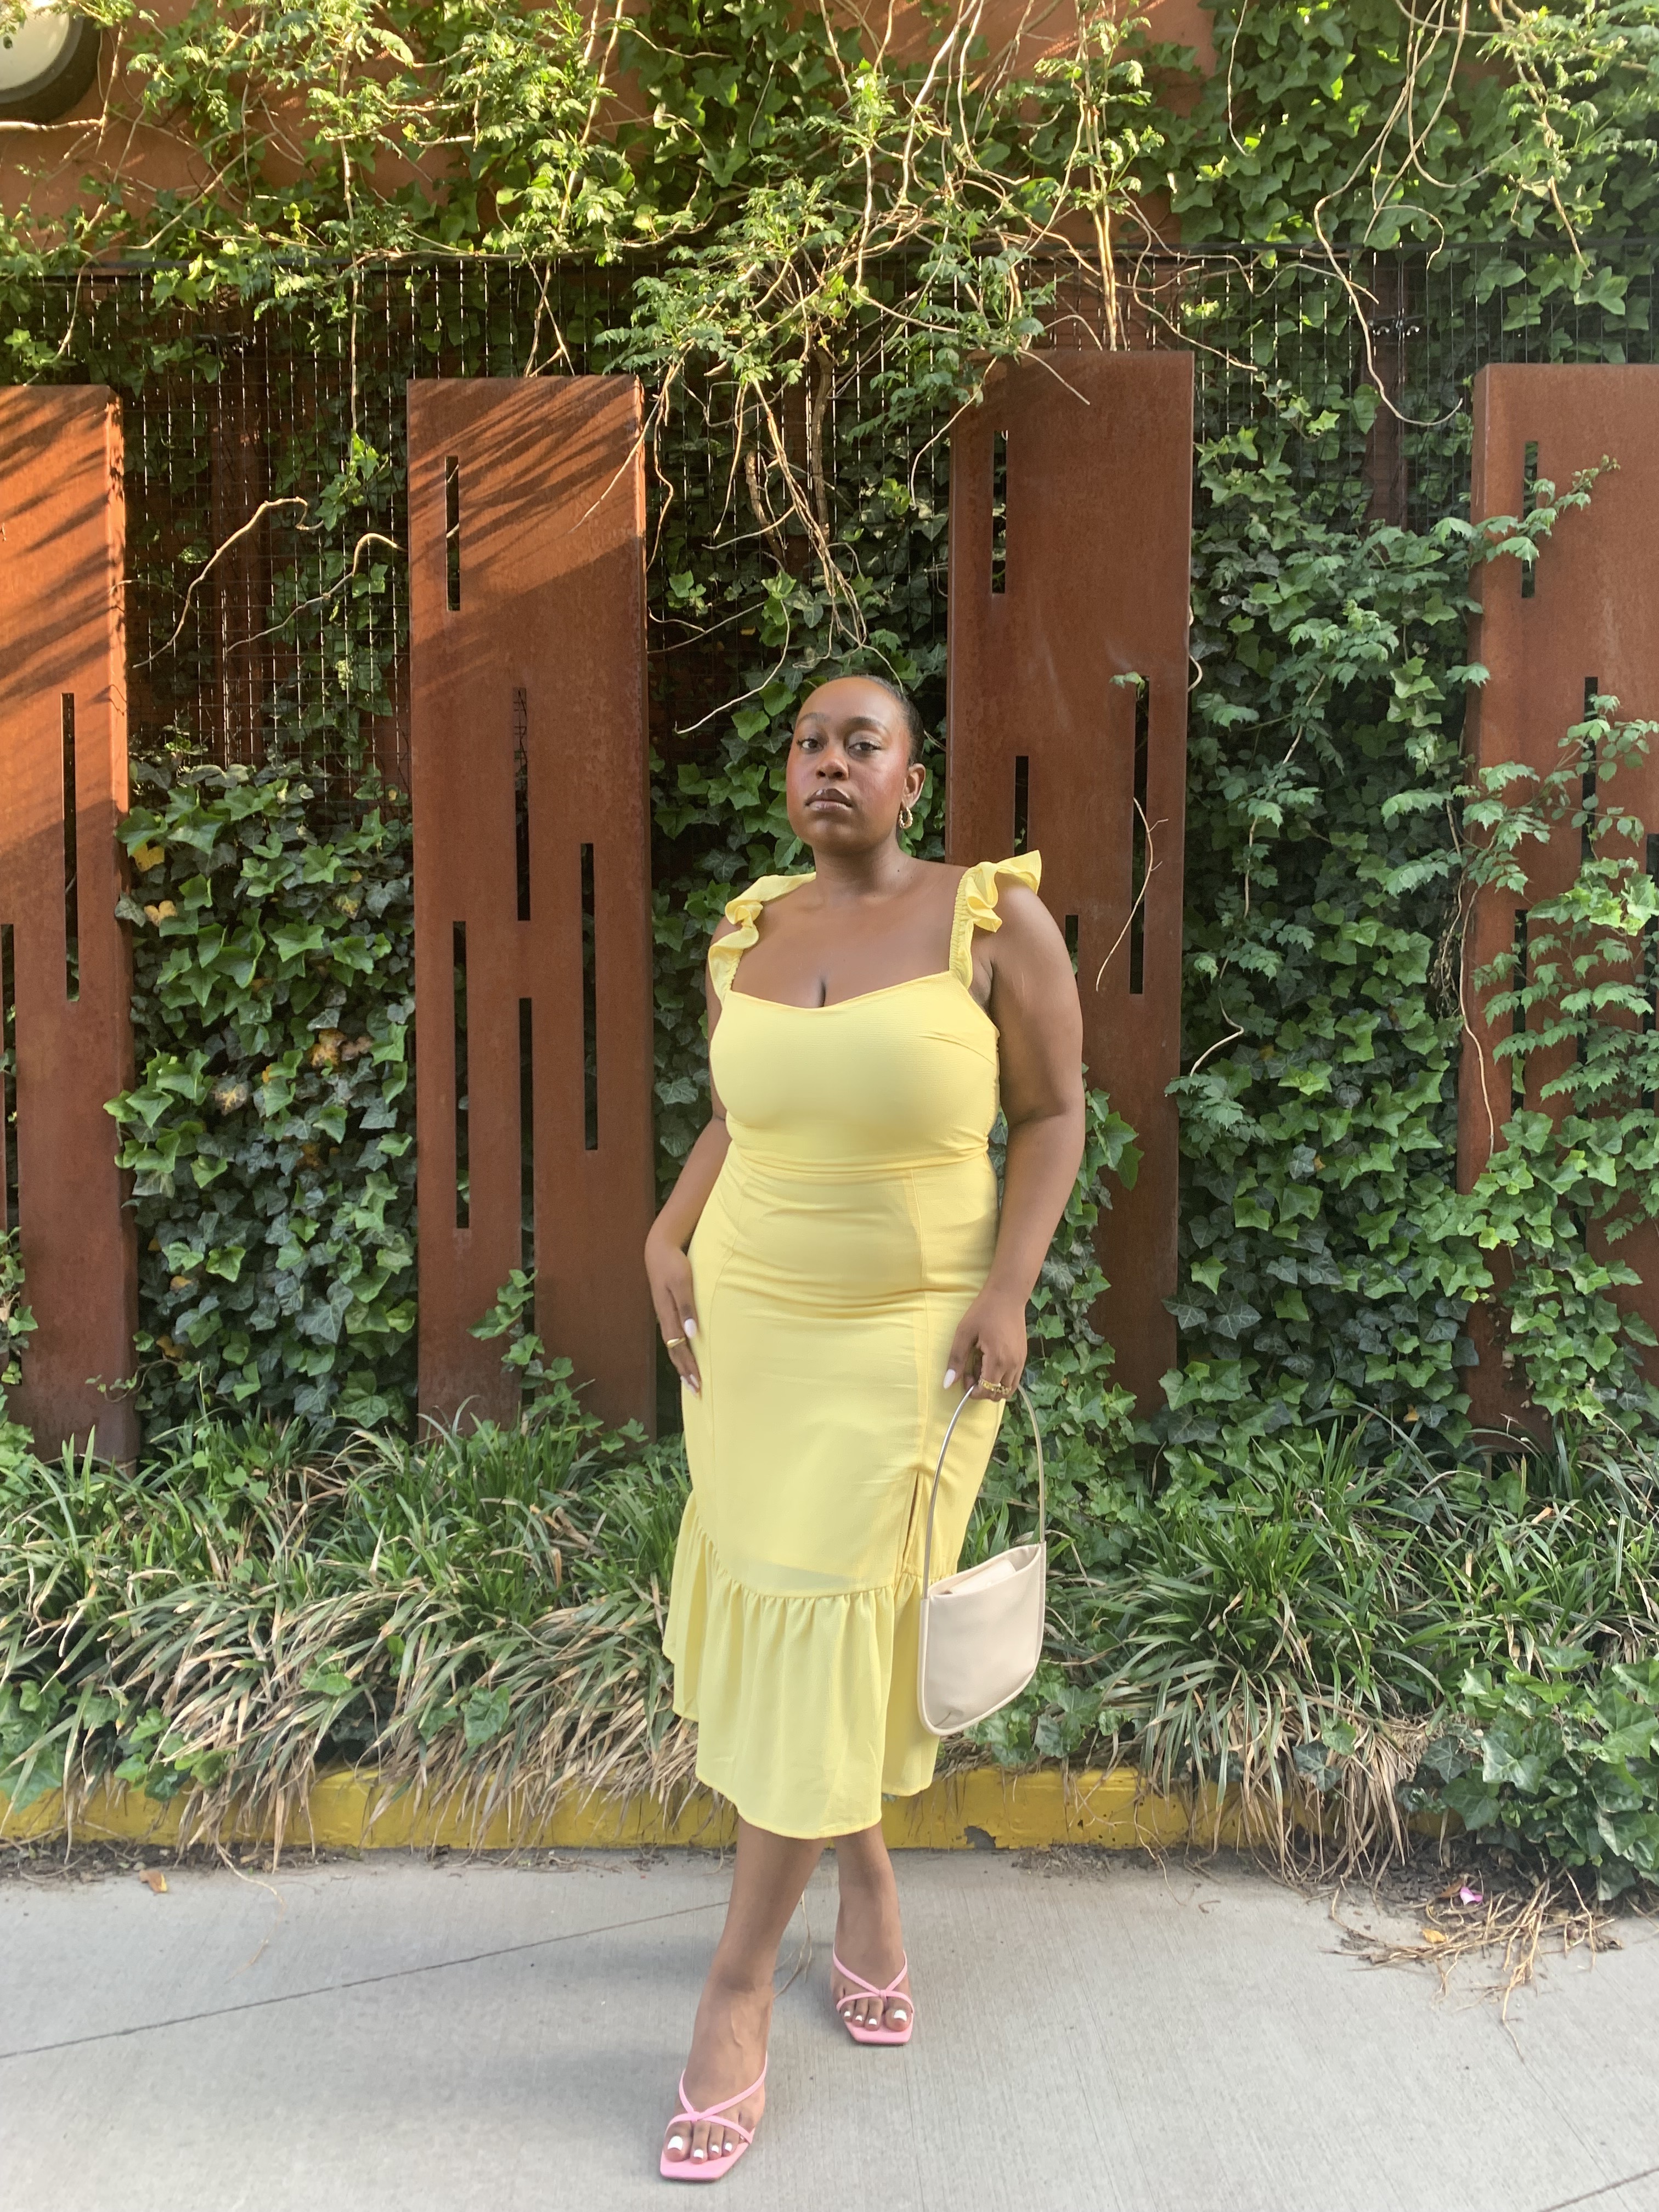 Bridal Shower Outfit Guide for Everyone - Sisi Couture